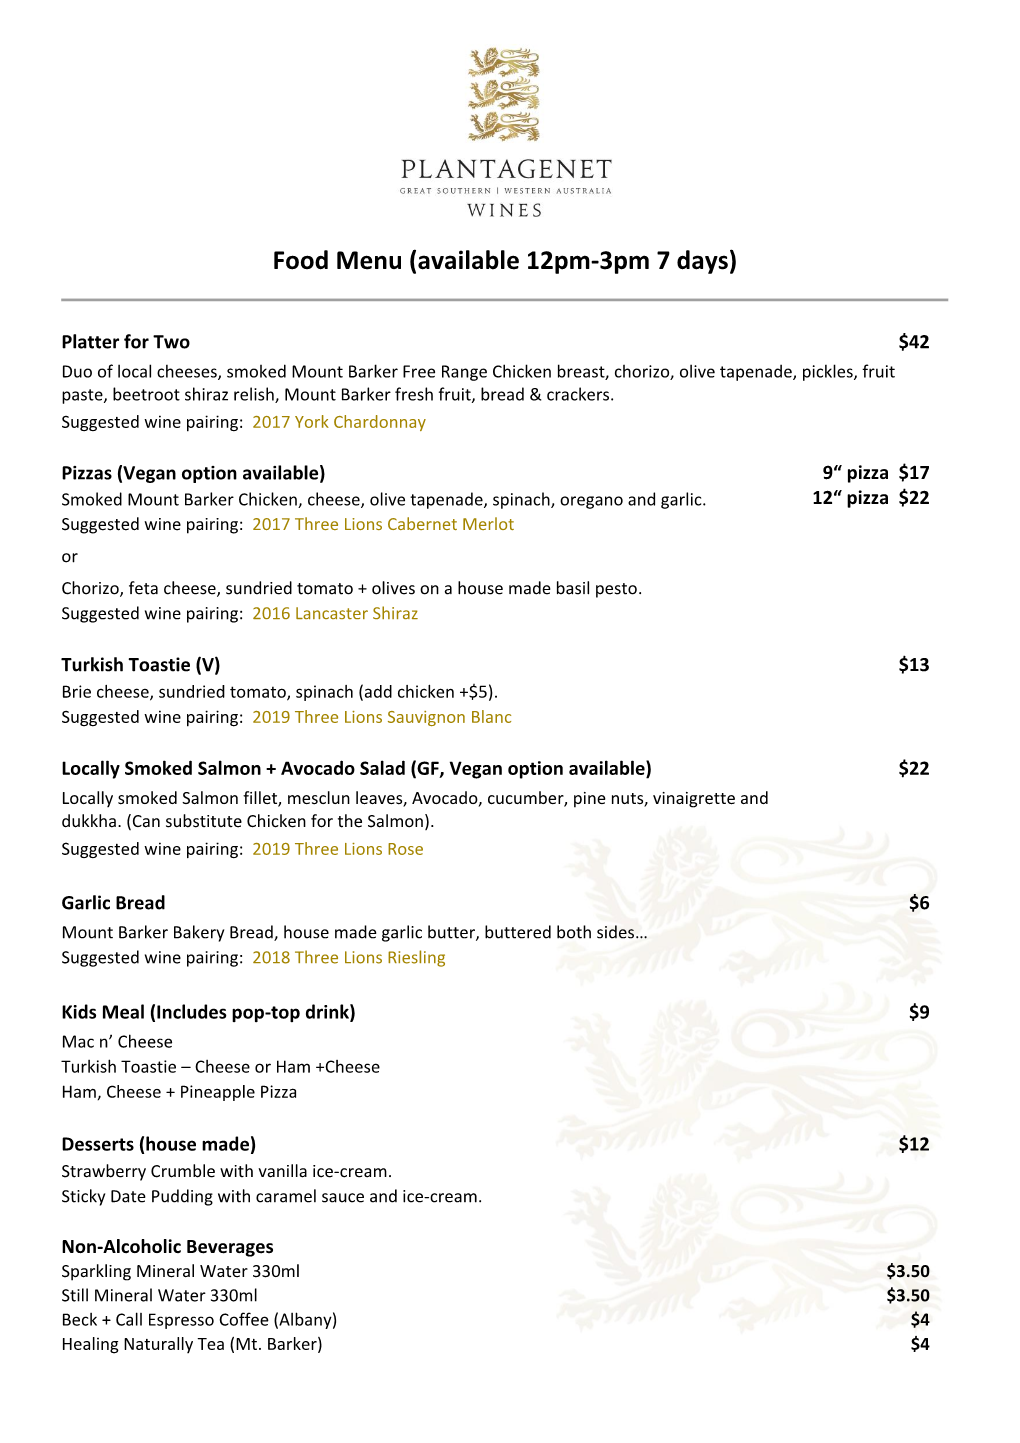 Food Menu (Available 12Pm-3Pm 7 Days)